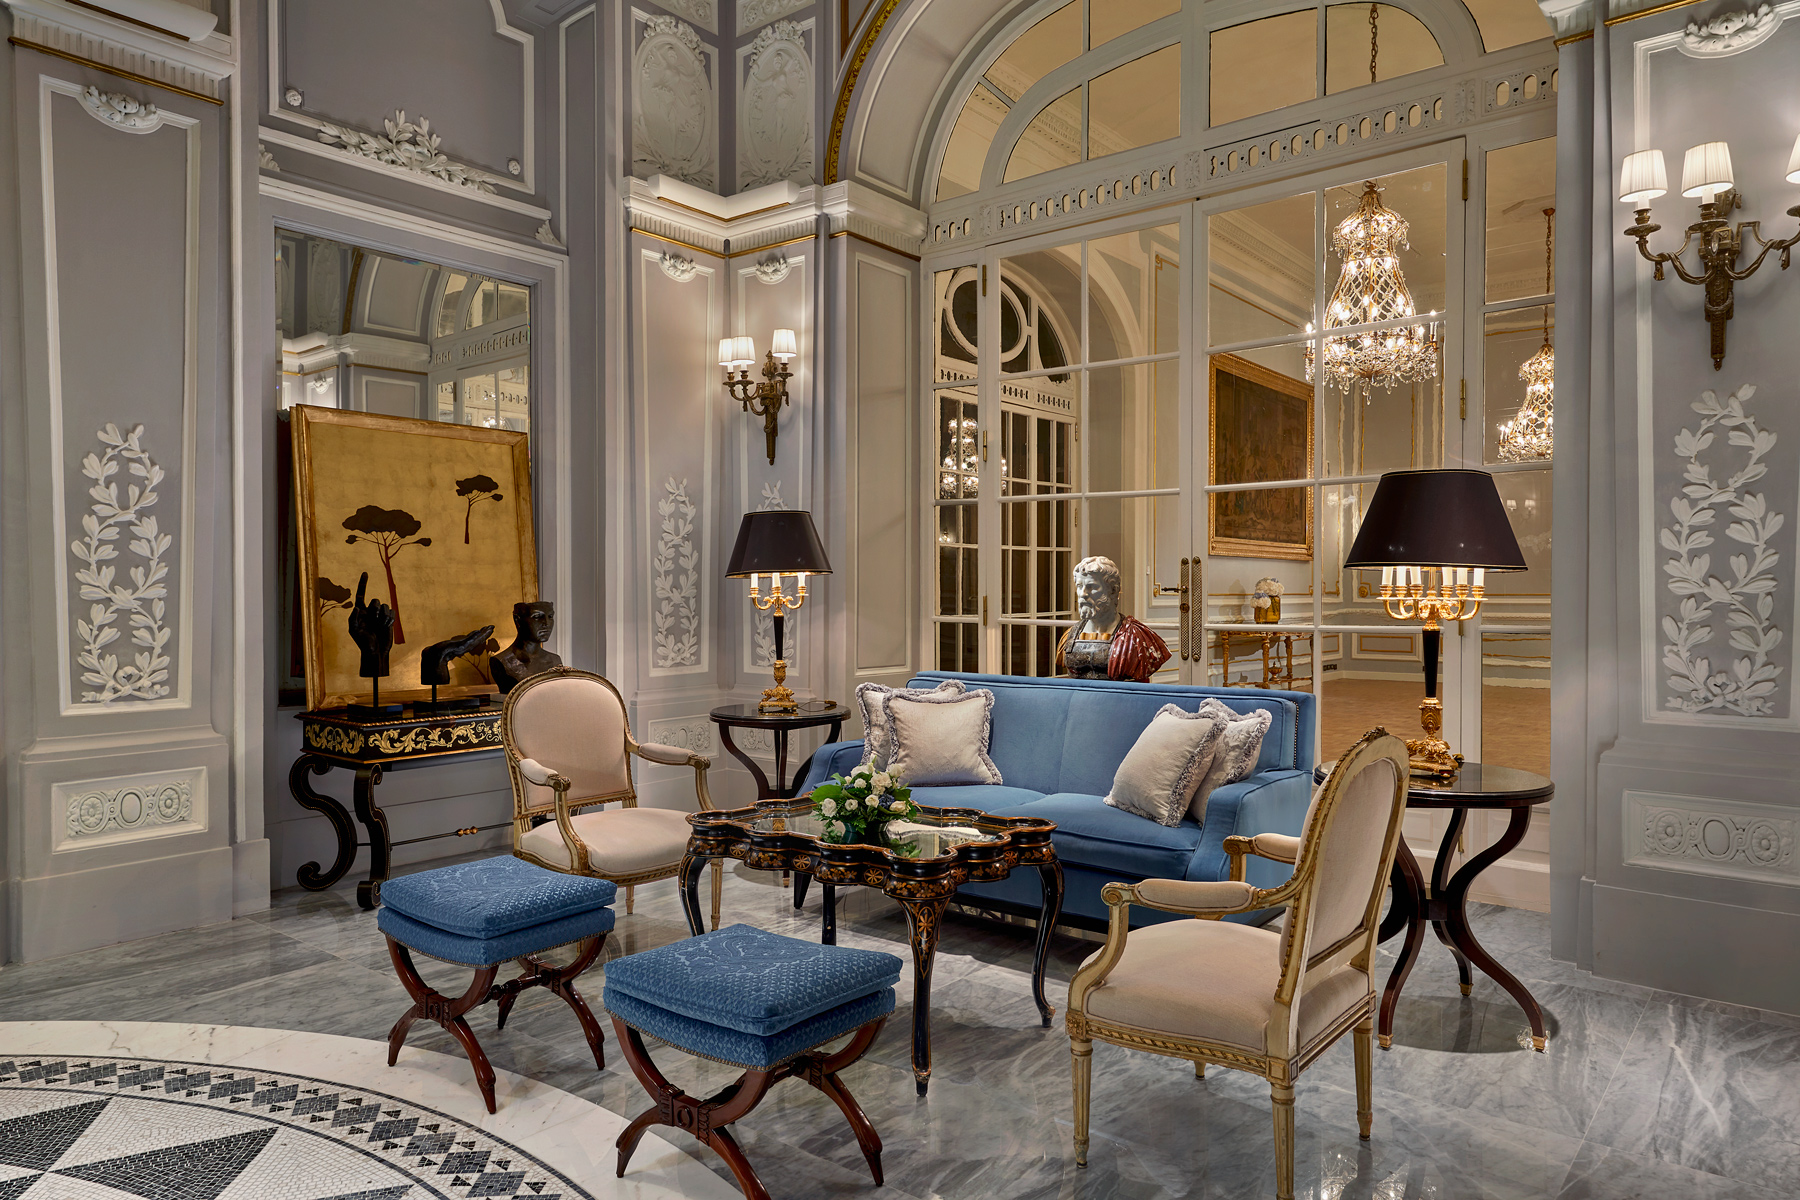 The St. Regis Rome Hotel undergoes a modern makeover.